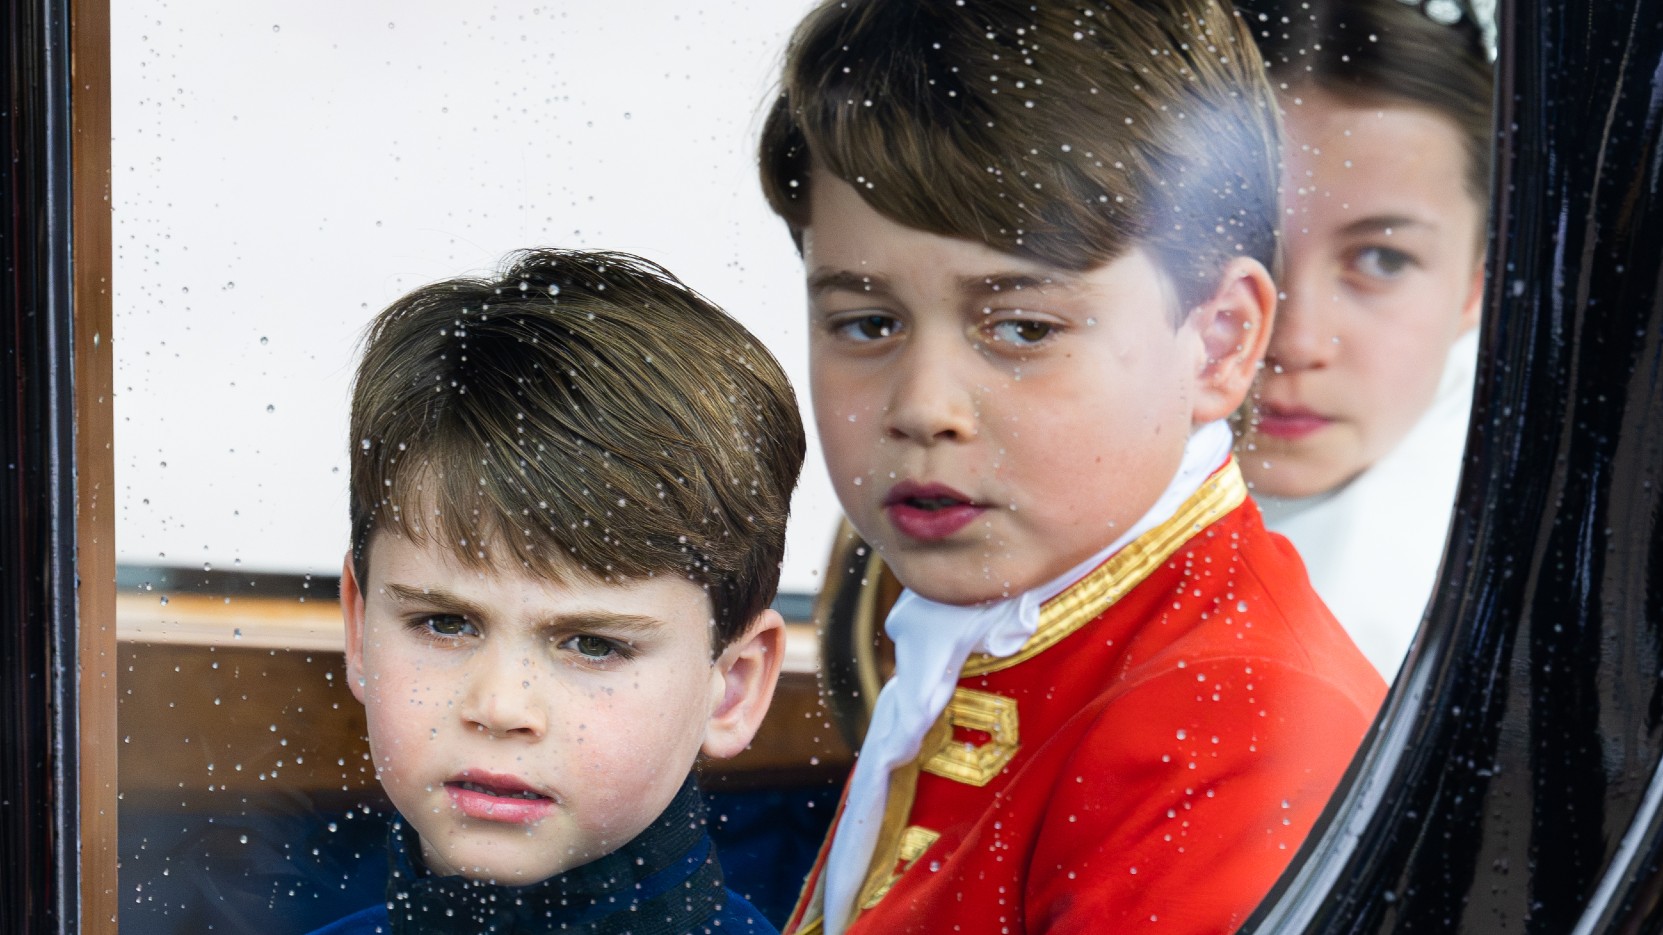 Kate’s Brother James Middleton Shares Why Prince George, Princess Charlotte, and Prince Louis are “Lucky”